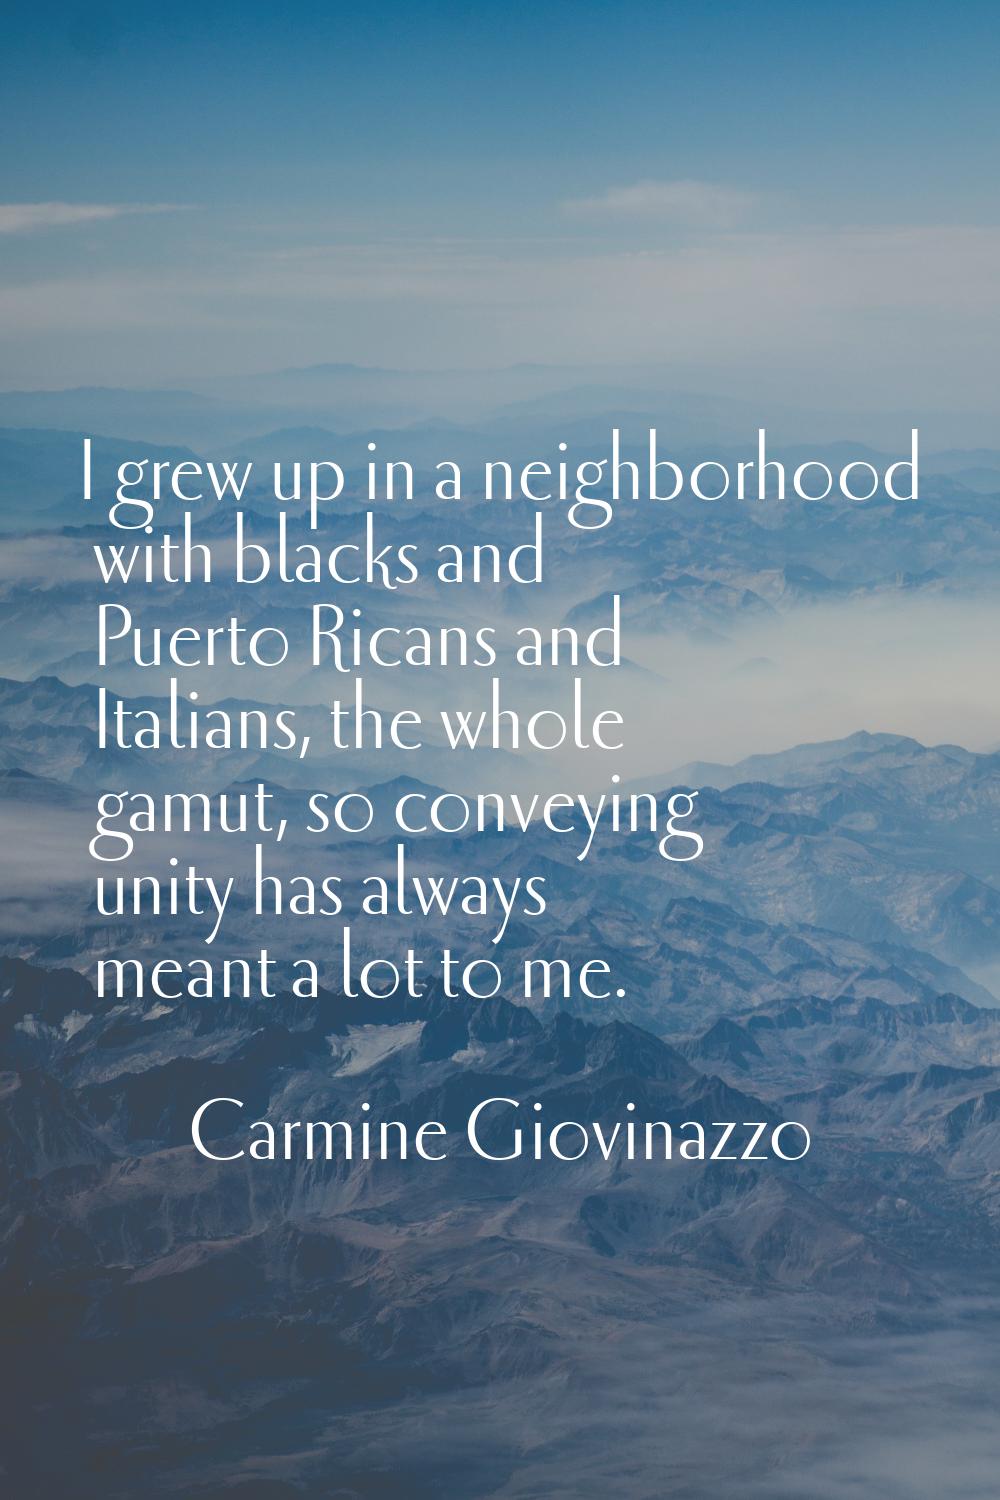 I grew up in a neighborhood with blacks and Puerto Ricans and Italians, the whole gamut, so conveyi